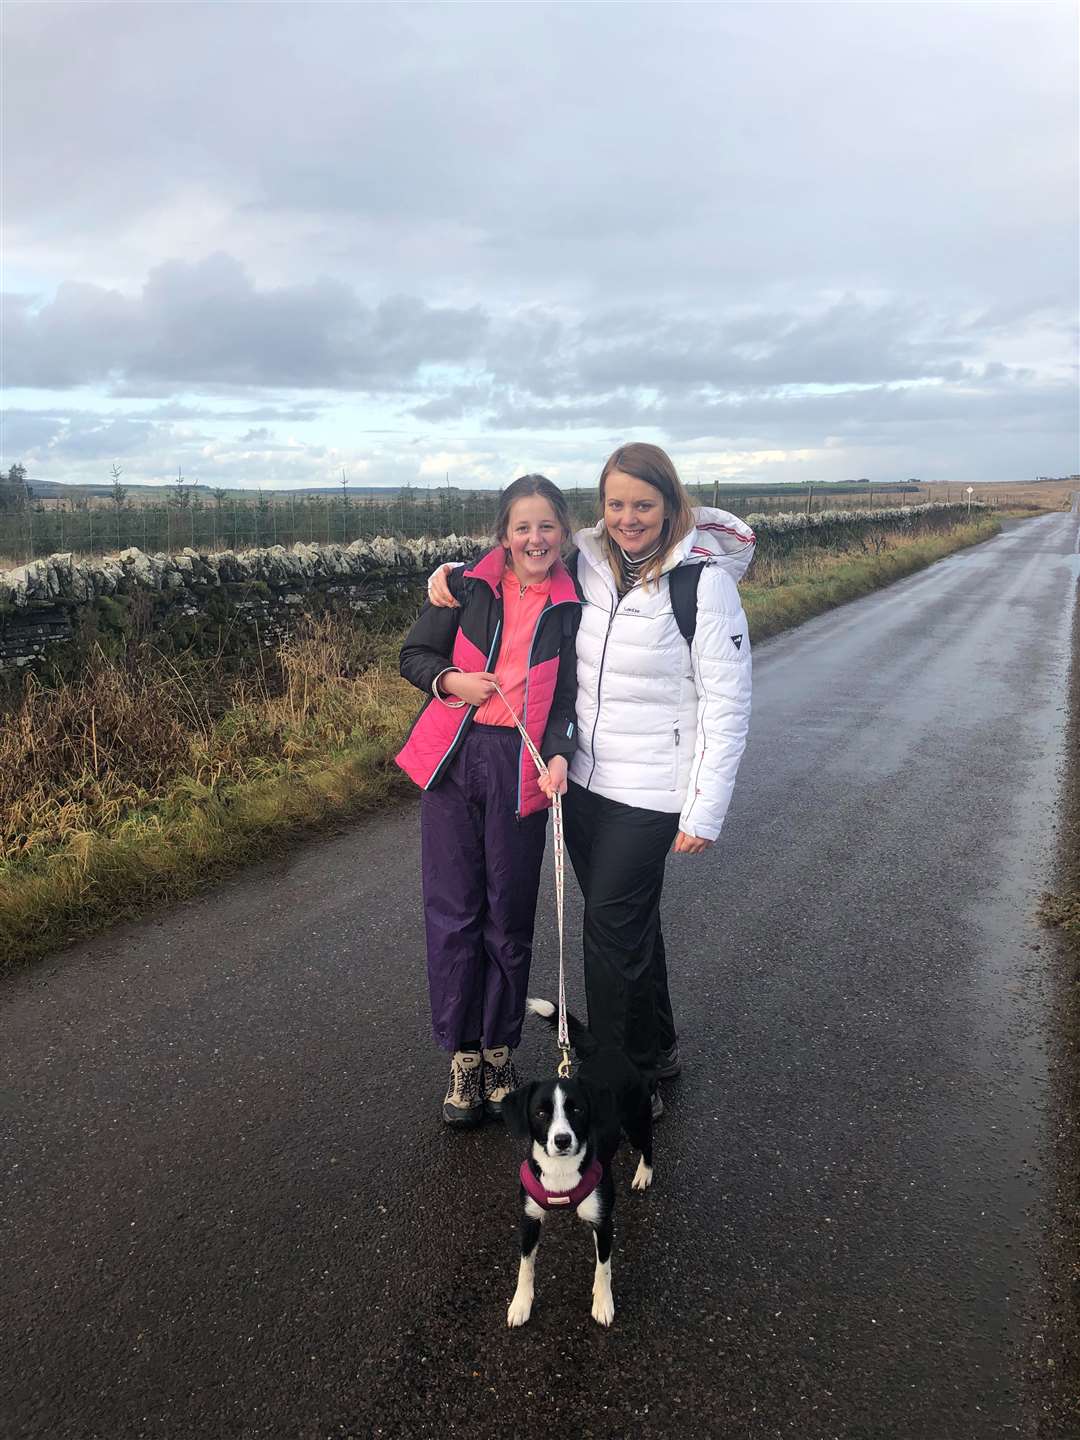 Catriona, her mum Elizabeth and Honey the dog on their fundraising walk.